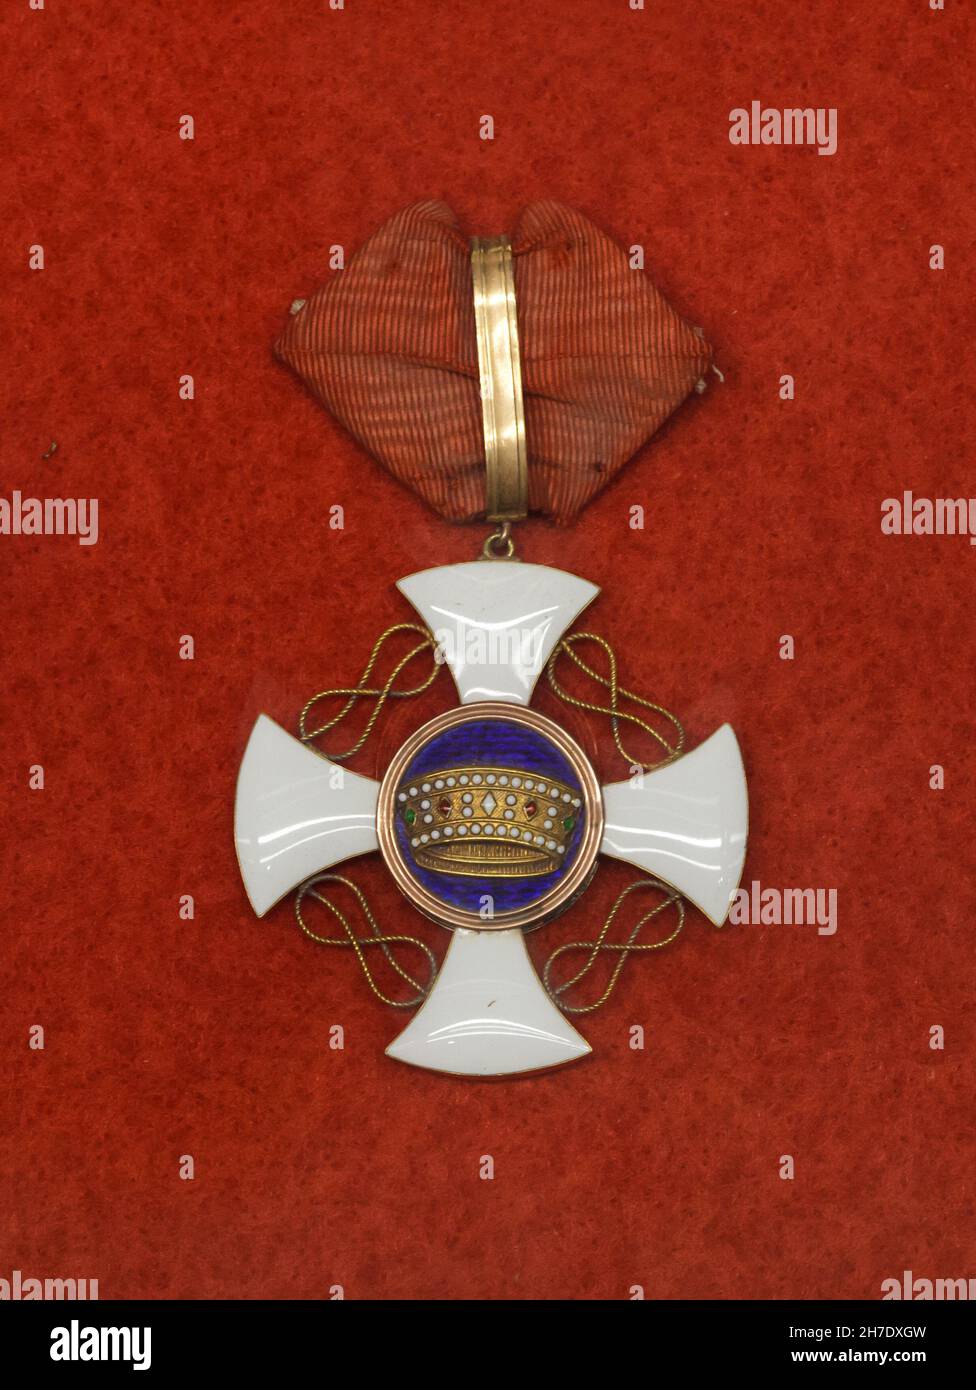 The Order of the Crown of Italy (Ordine della Corona d'Italia) on display in the Armistice Museum in the Forest of Compiègne (Forêt de Compiègne) near Compiègne in France. French general Louis Auguste Adrian (1859 – 1933) was awarded by this Italian national order. The Armistice Museum is located on the ground of the Glade of the Armistice where the Armistice of 11 November 1918 that ended the First World War was signed. Stock Photo